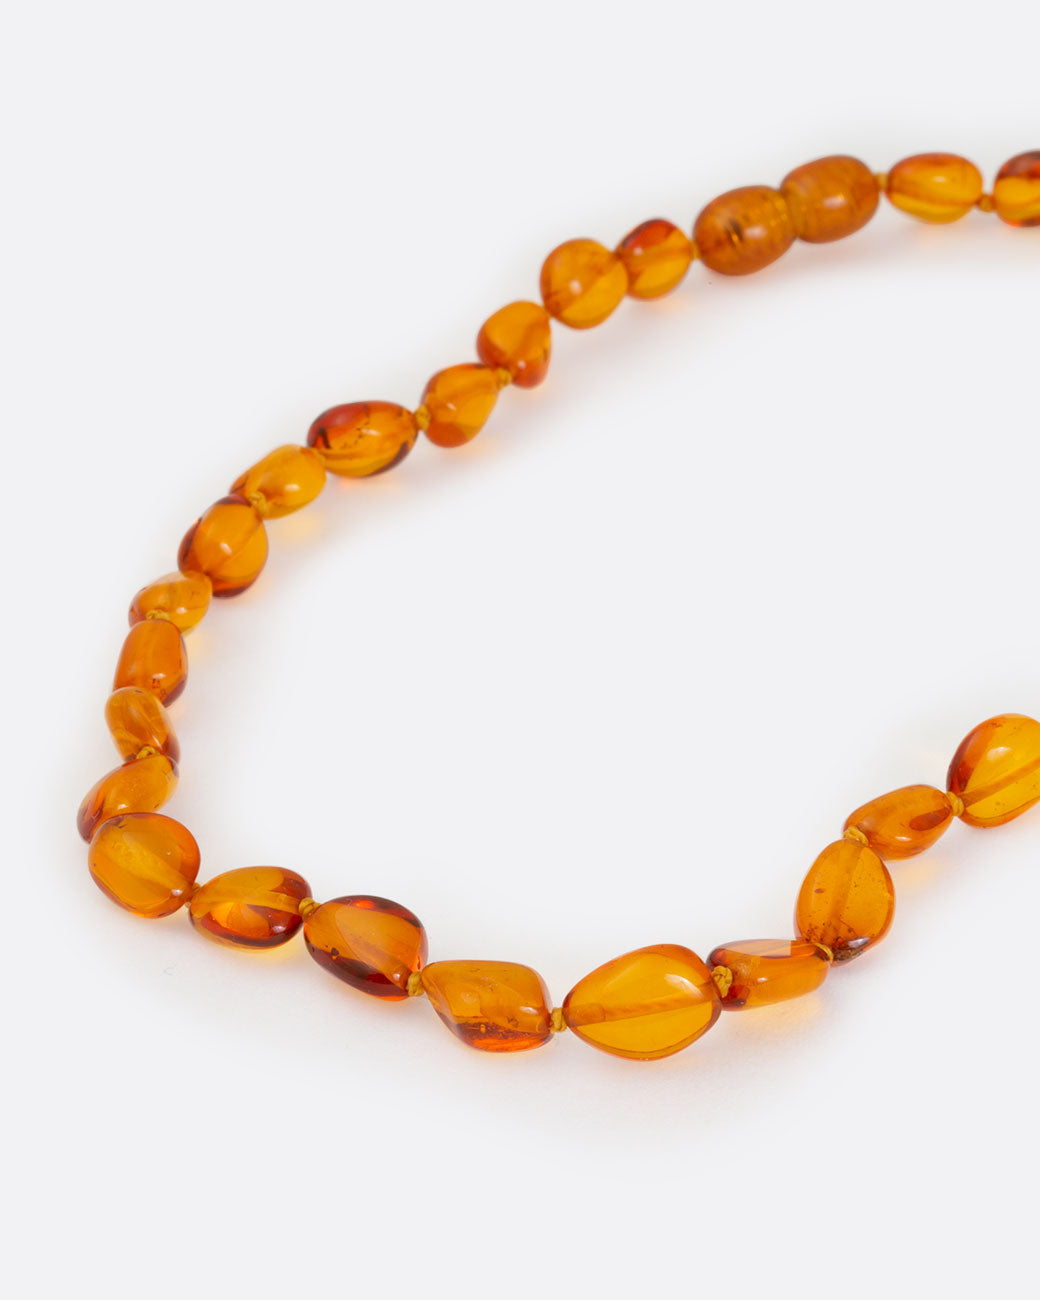 Cognac amber teething necklace, shown from the side.